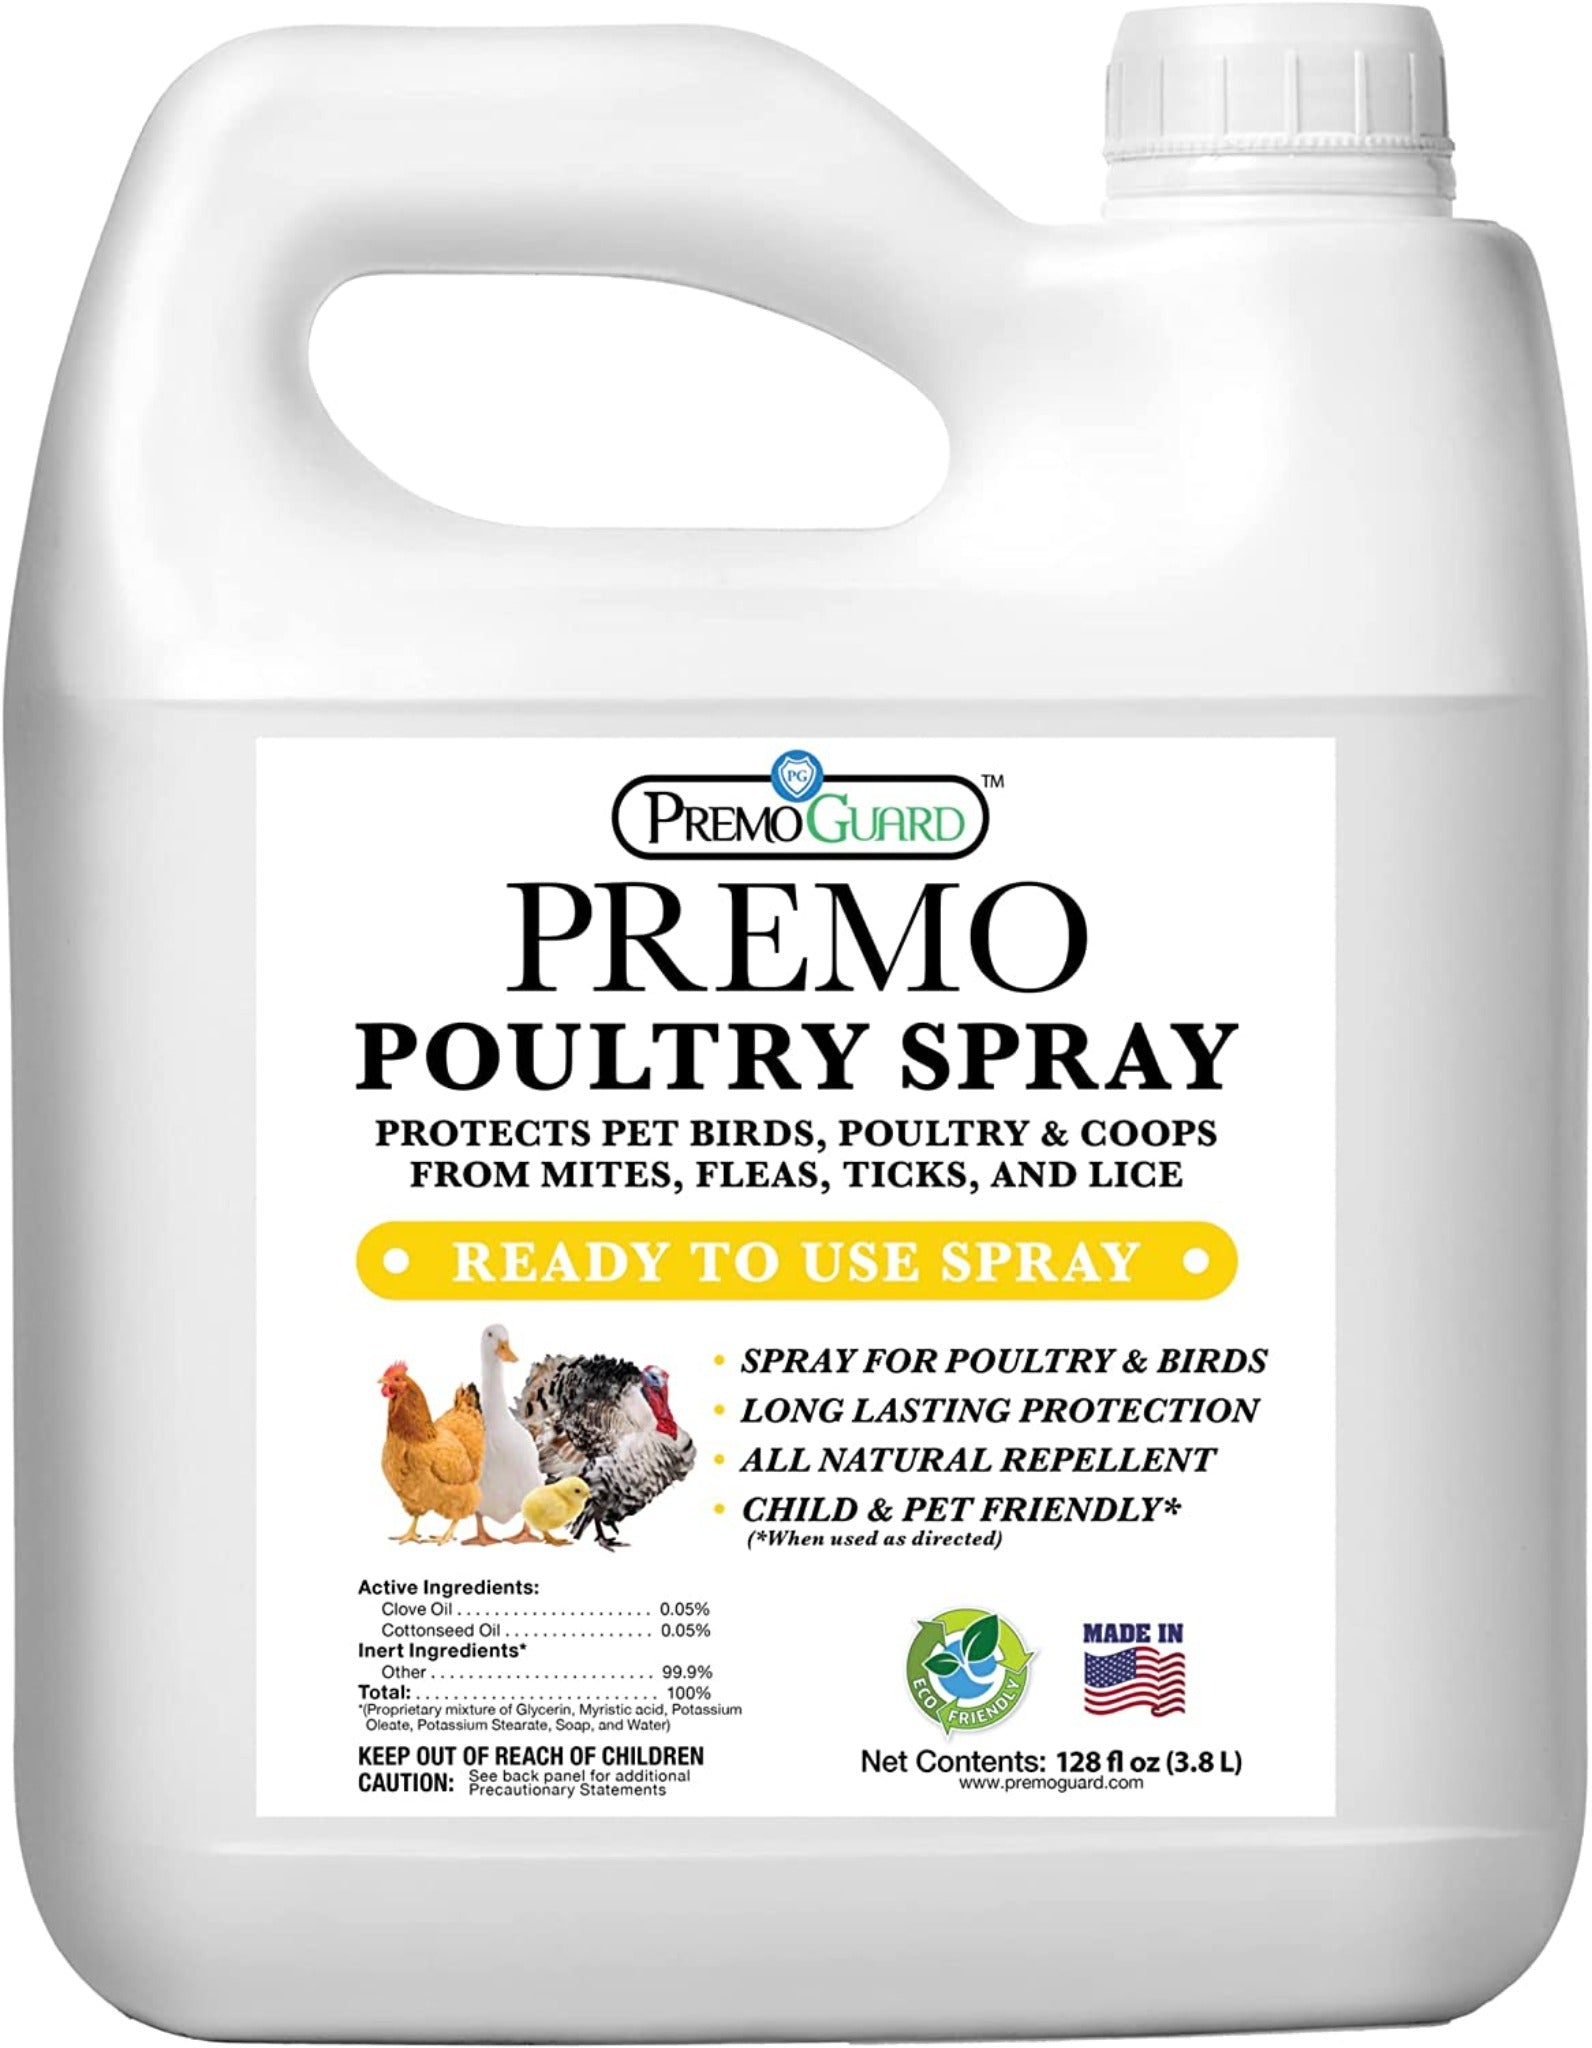 Hatching Time Premo Guard. Premo poultry spray gallon can be seen in image. Ready to use spray to protect poultry from mites, fleas, ticks and lice. 